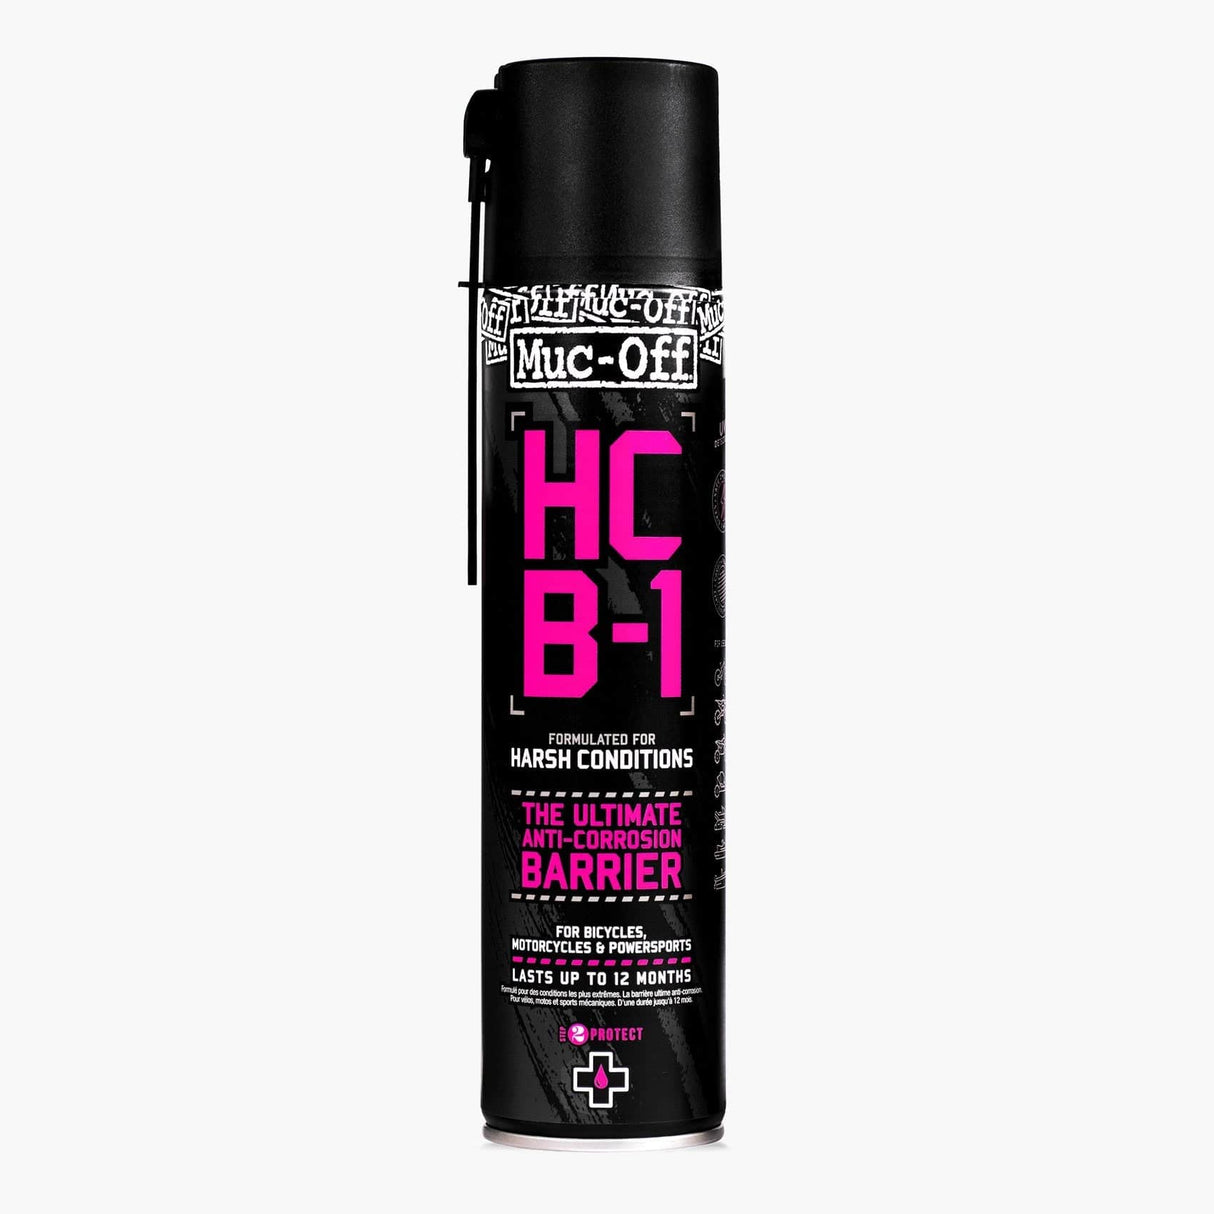 Muc-Off eBike HCB-1 Hard Conditions Barrier 400ml